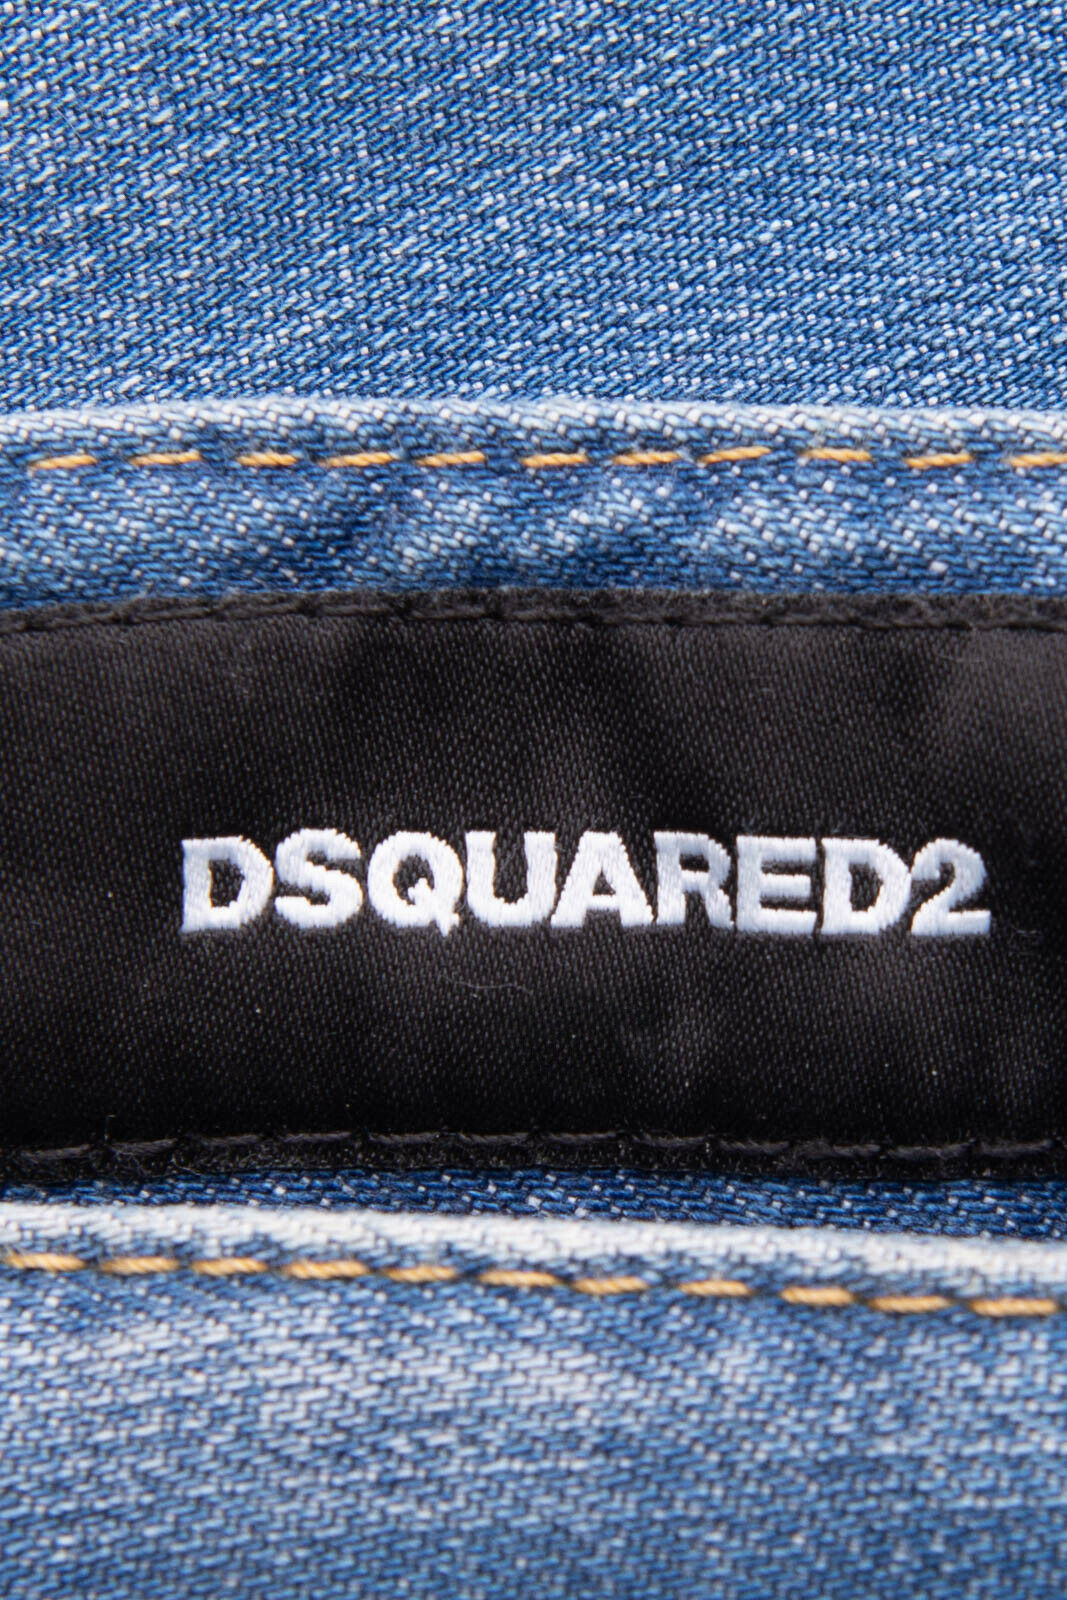 DSQUARED2 HAWAIIAN GRUNGE Jeans Size 38 Made in Italy